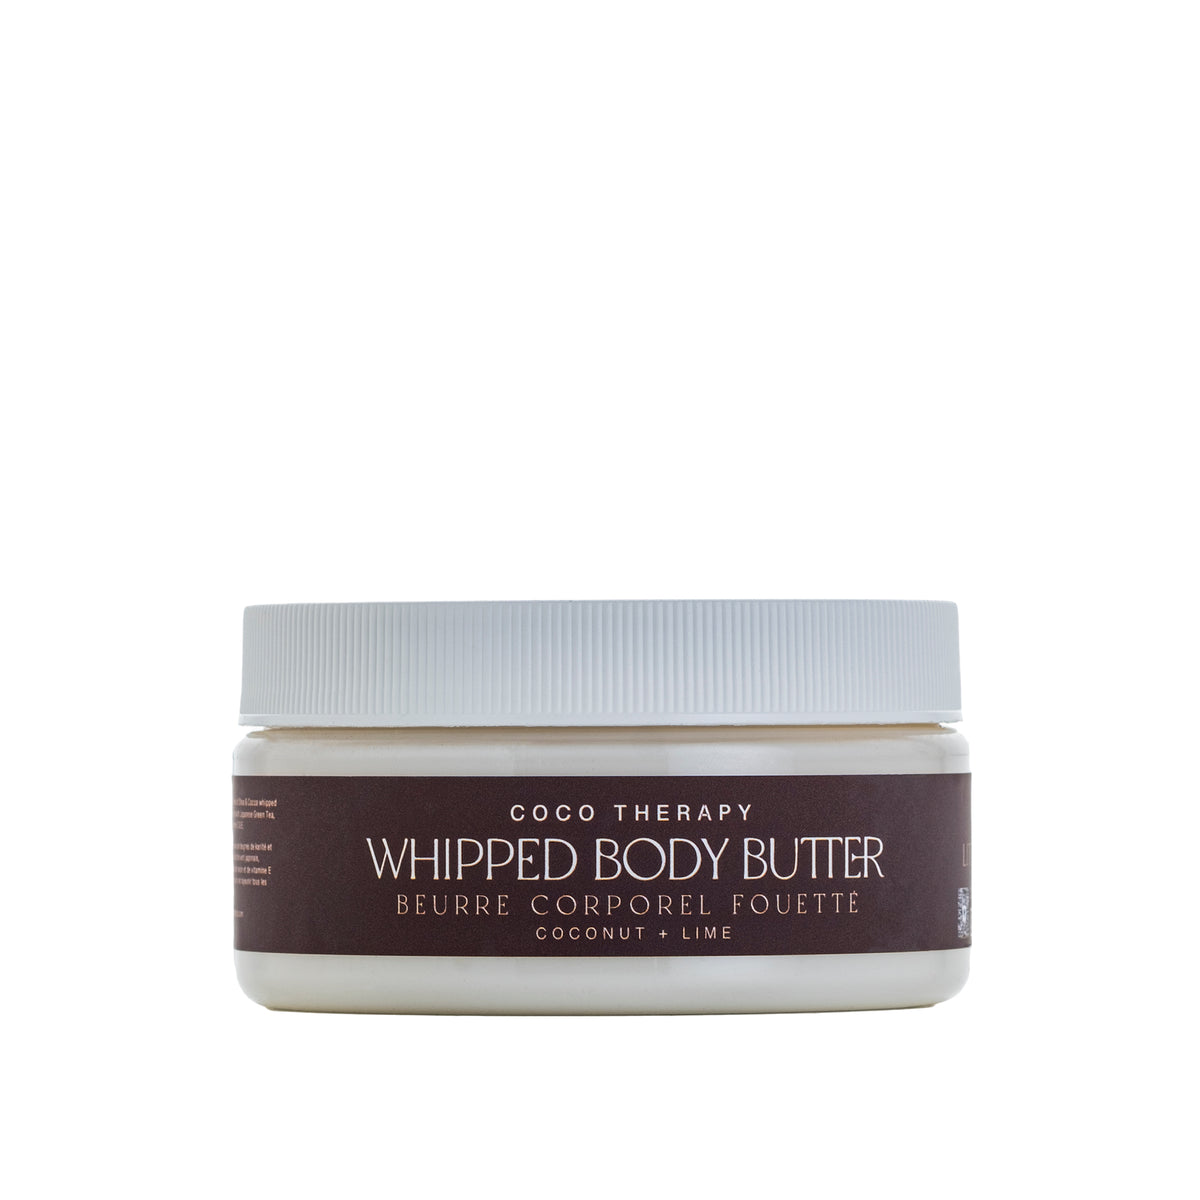 Whipped Body Butter - COCO THERAPY